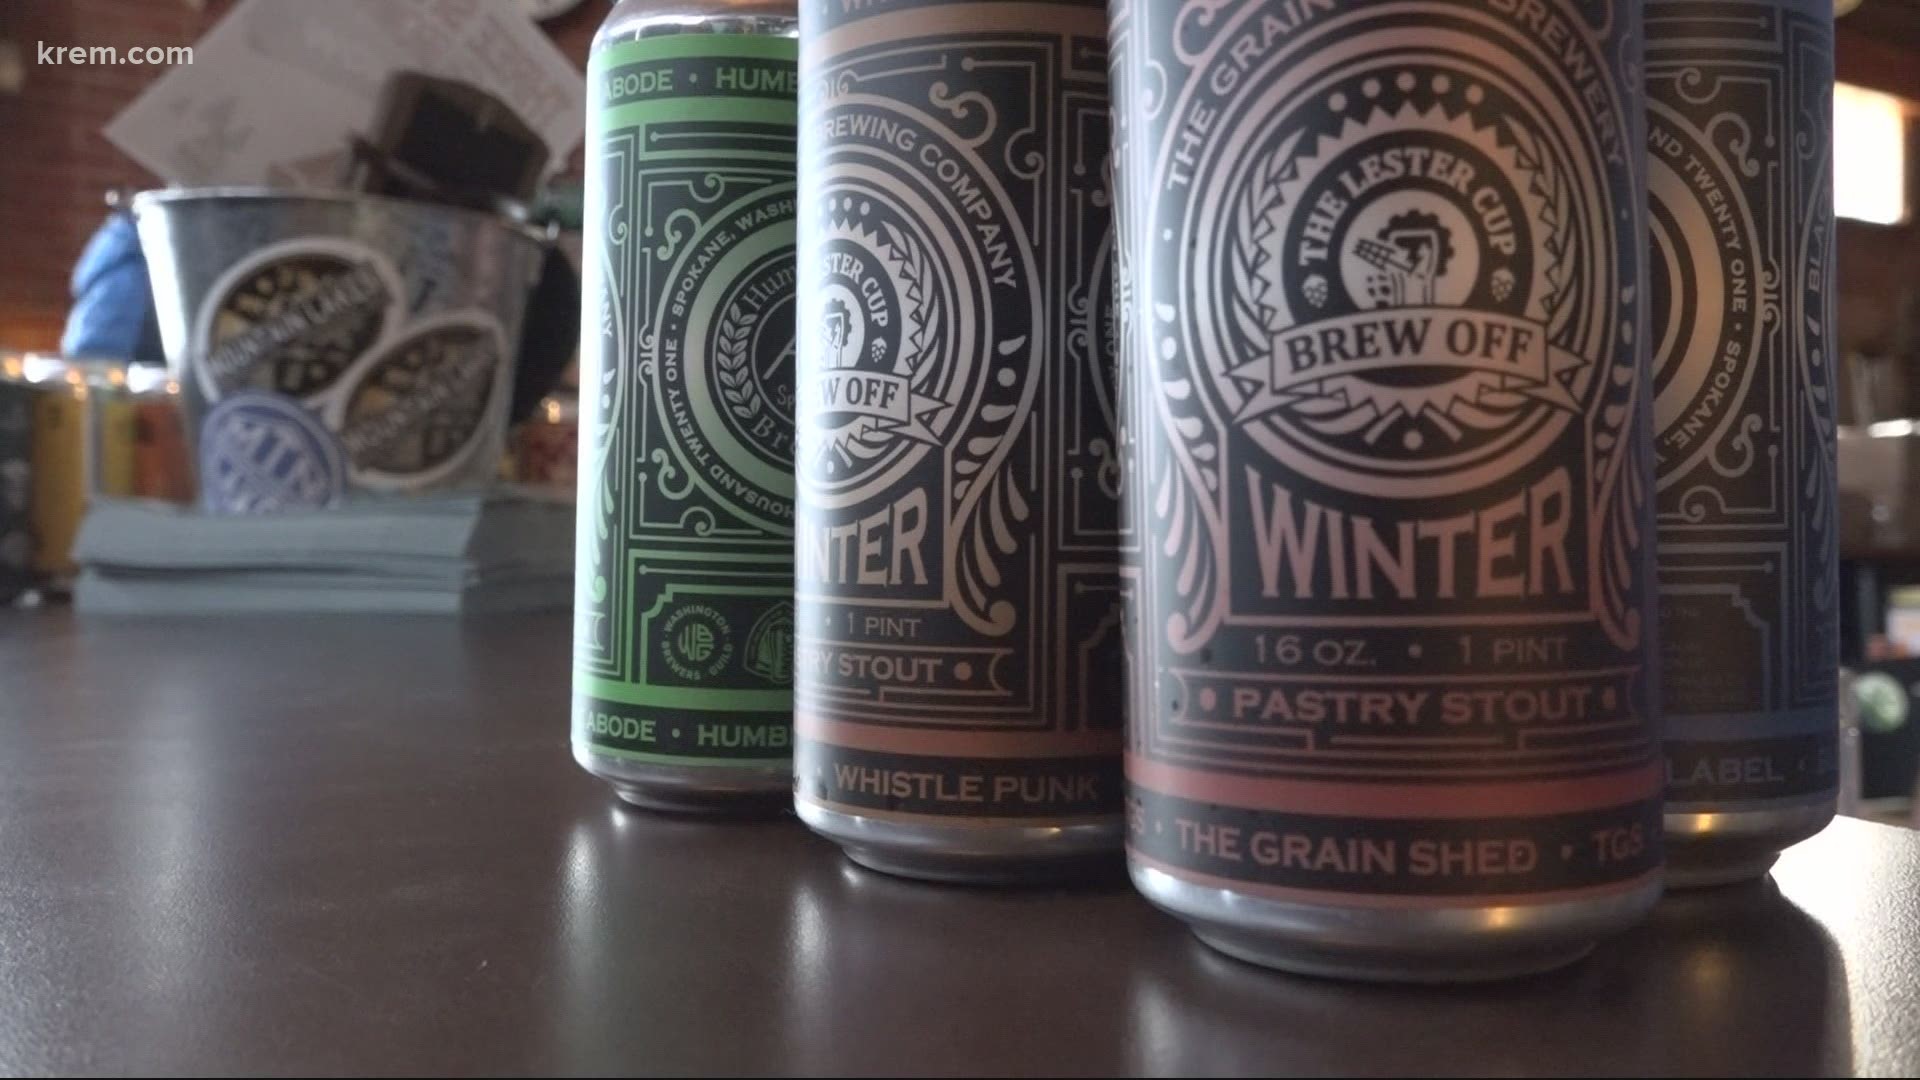 KREM's Joshua Robinson gives us a sneak peek of the local beers competing in the Winter edition of the Lester Cup Brew-Off.